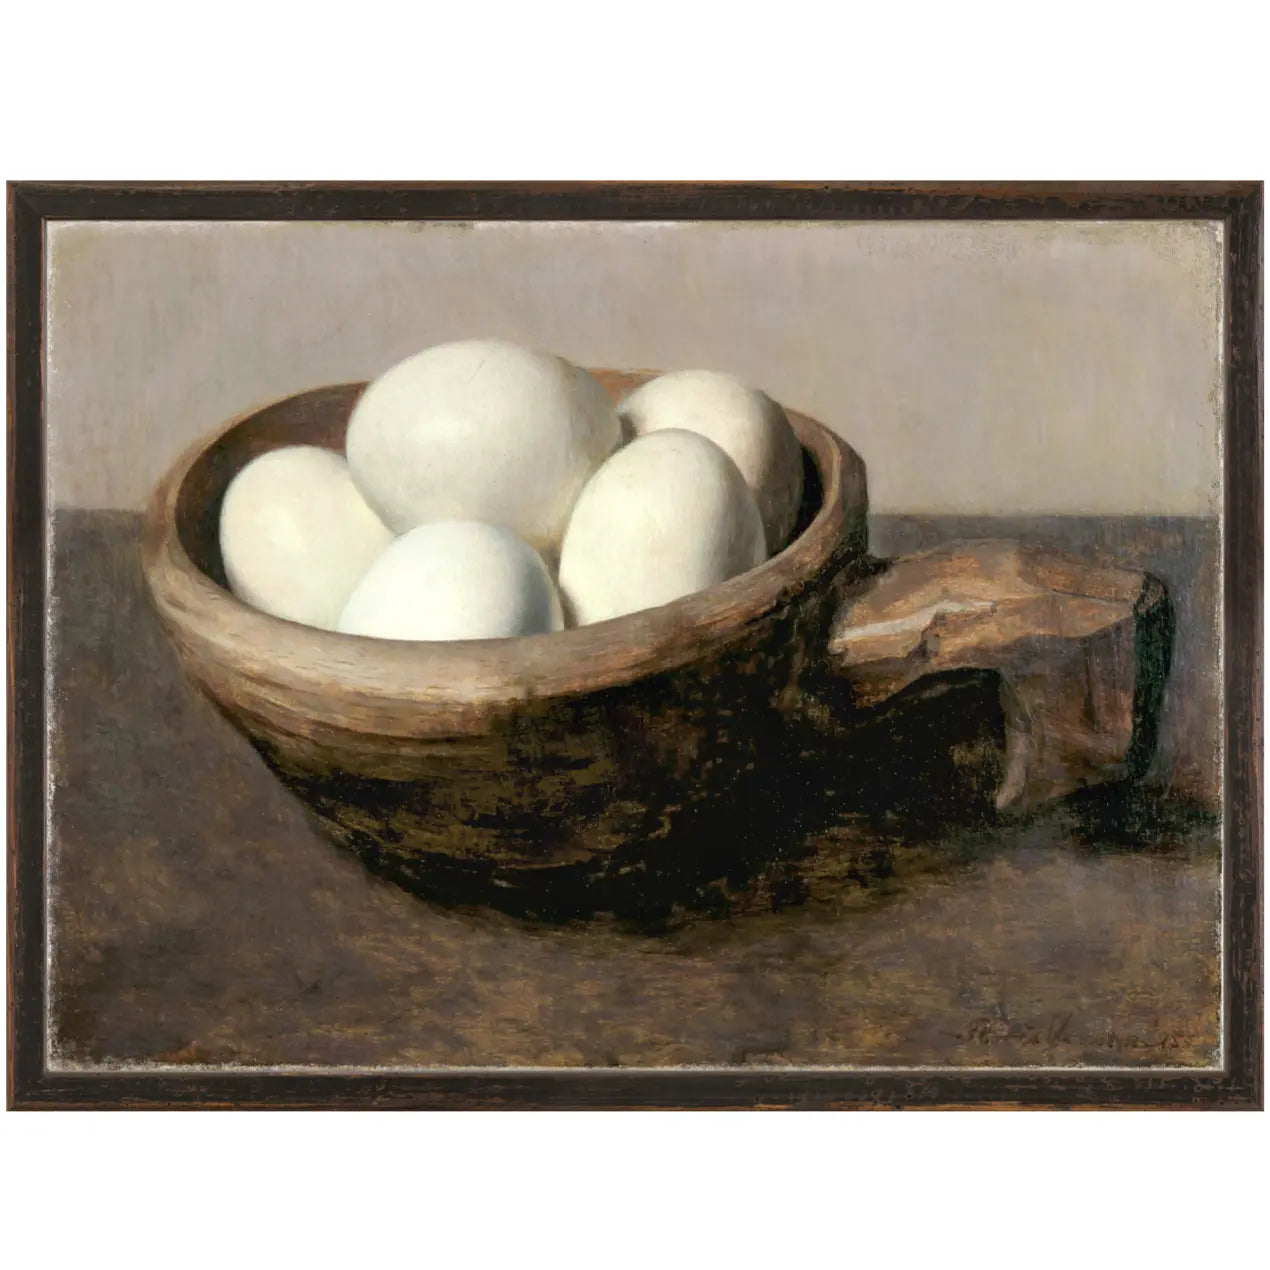 Home Smith Nap With Eggs c. 1915 Framed Print Celadon Art - In Stock